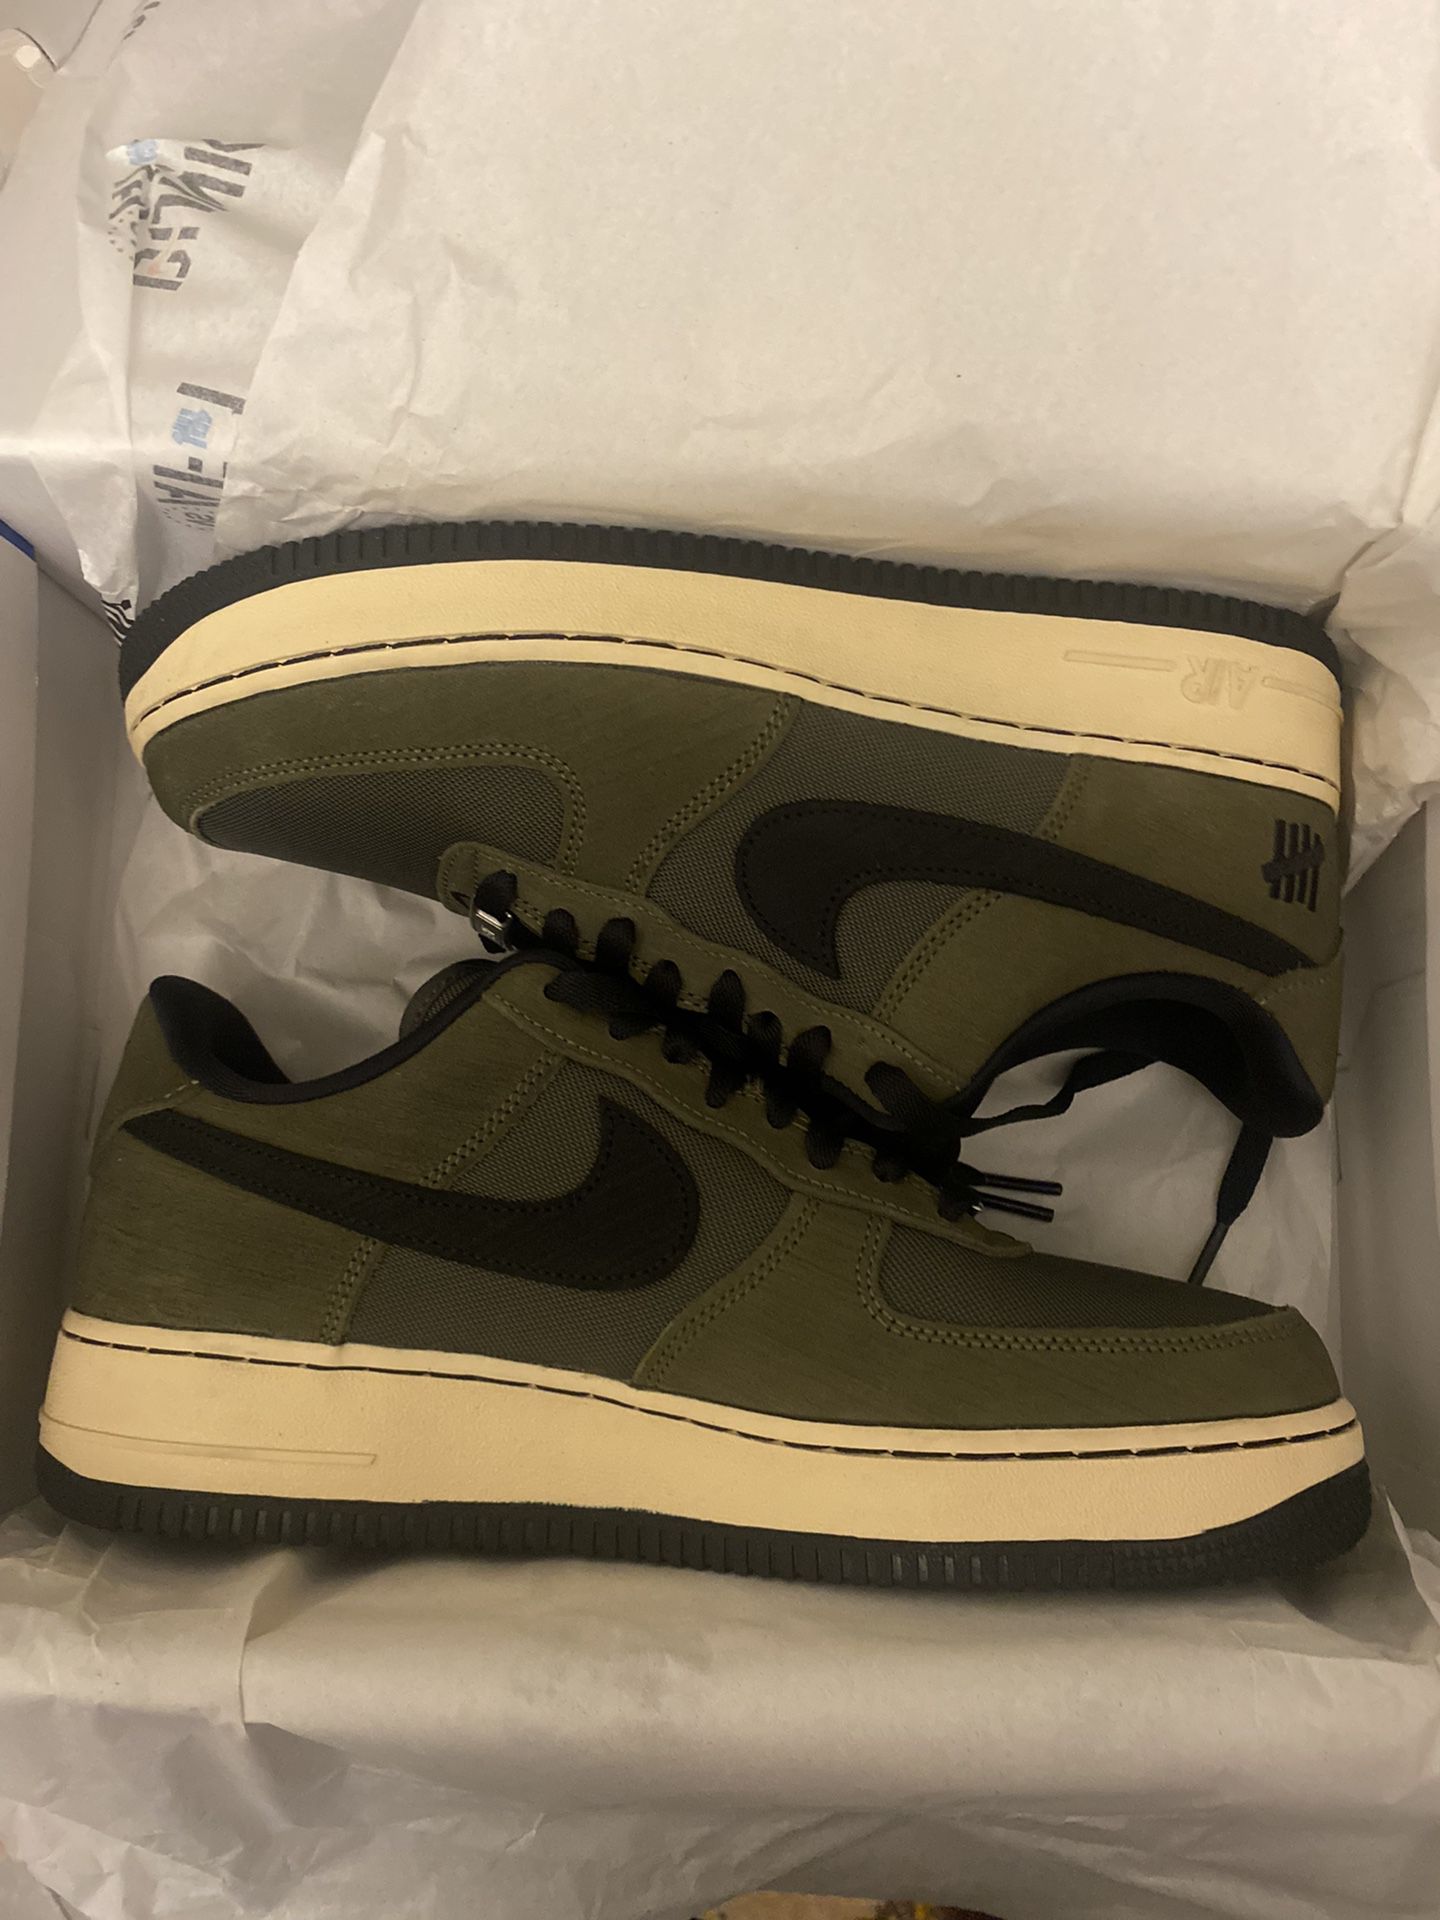 Brand New Undefeated Air forces Size 9